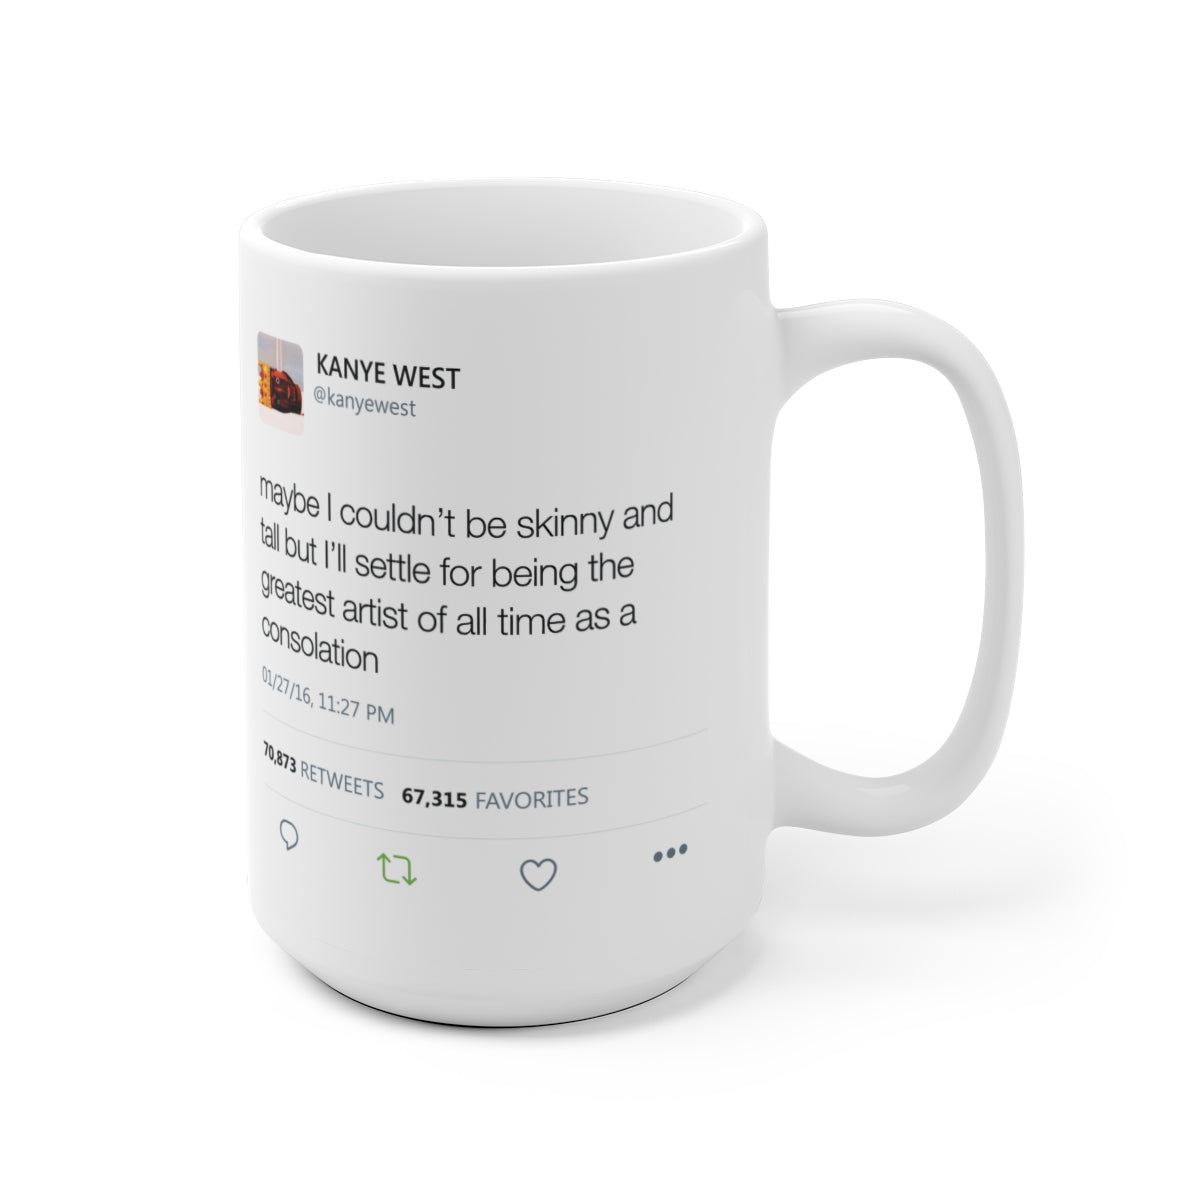 Maybe I couldn't be skinny and tall but I'll settle for being the greatest artist Kanye Tweet Mug-Archethype